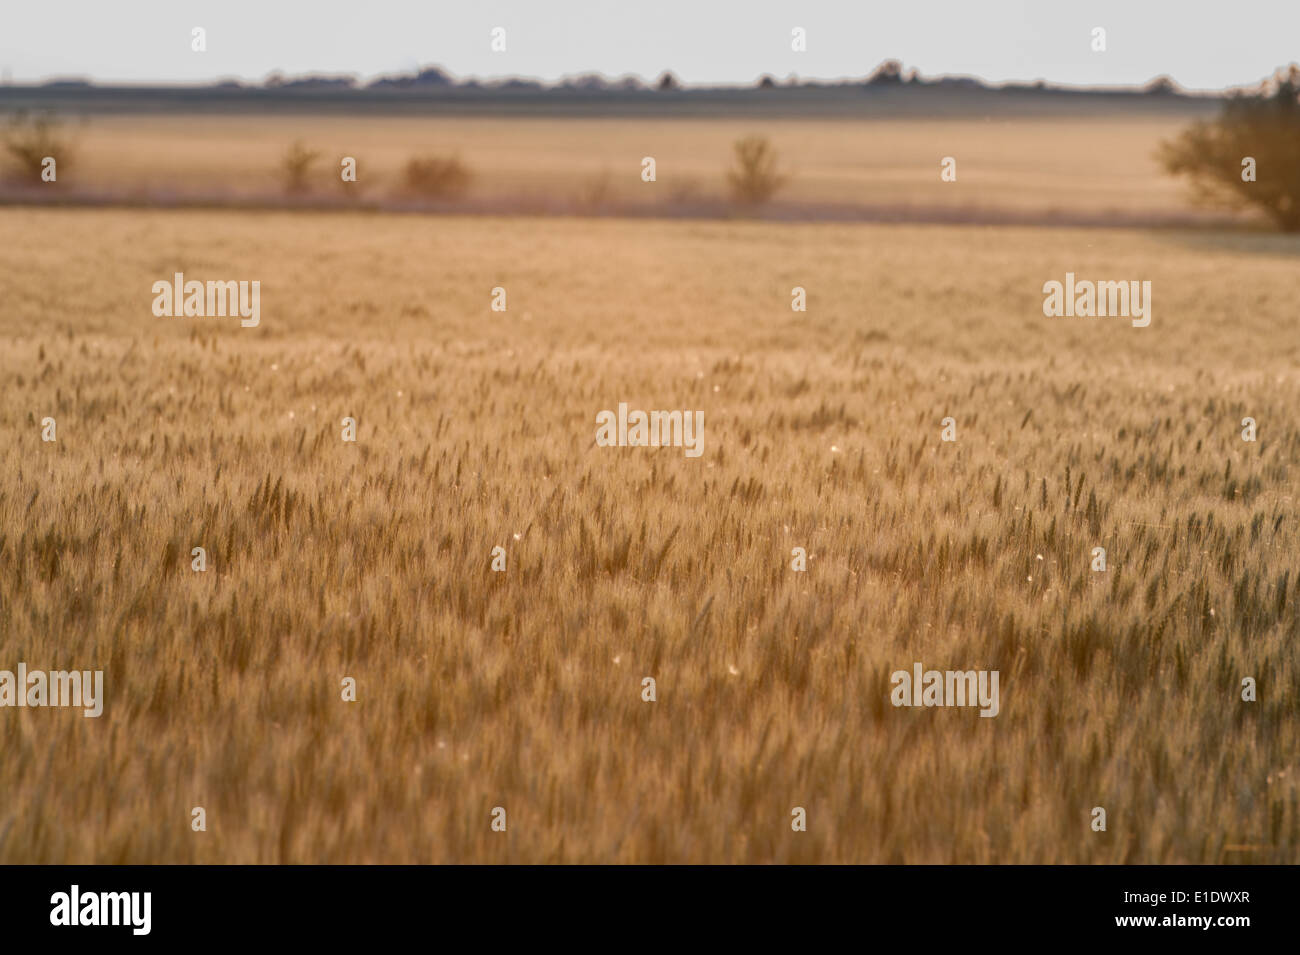 Wheat field on the Great Plains Stock Photo